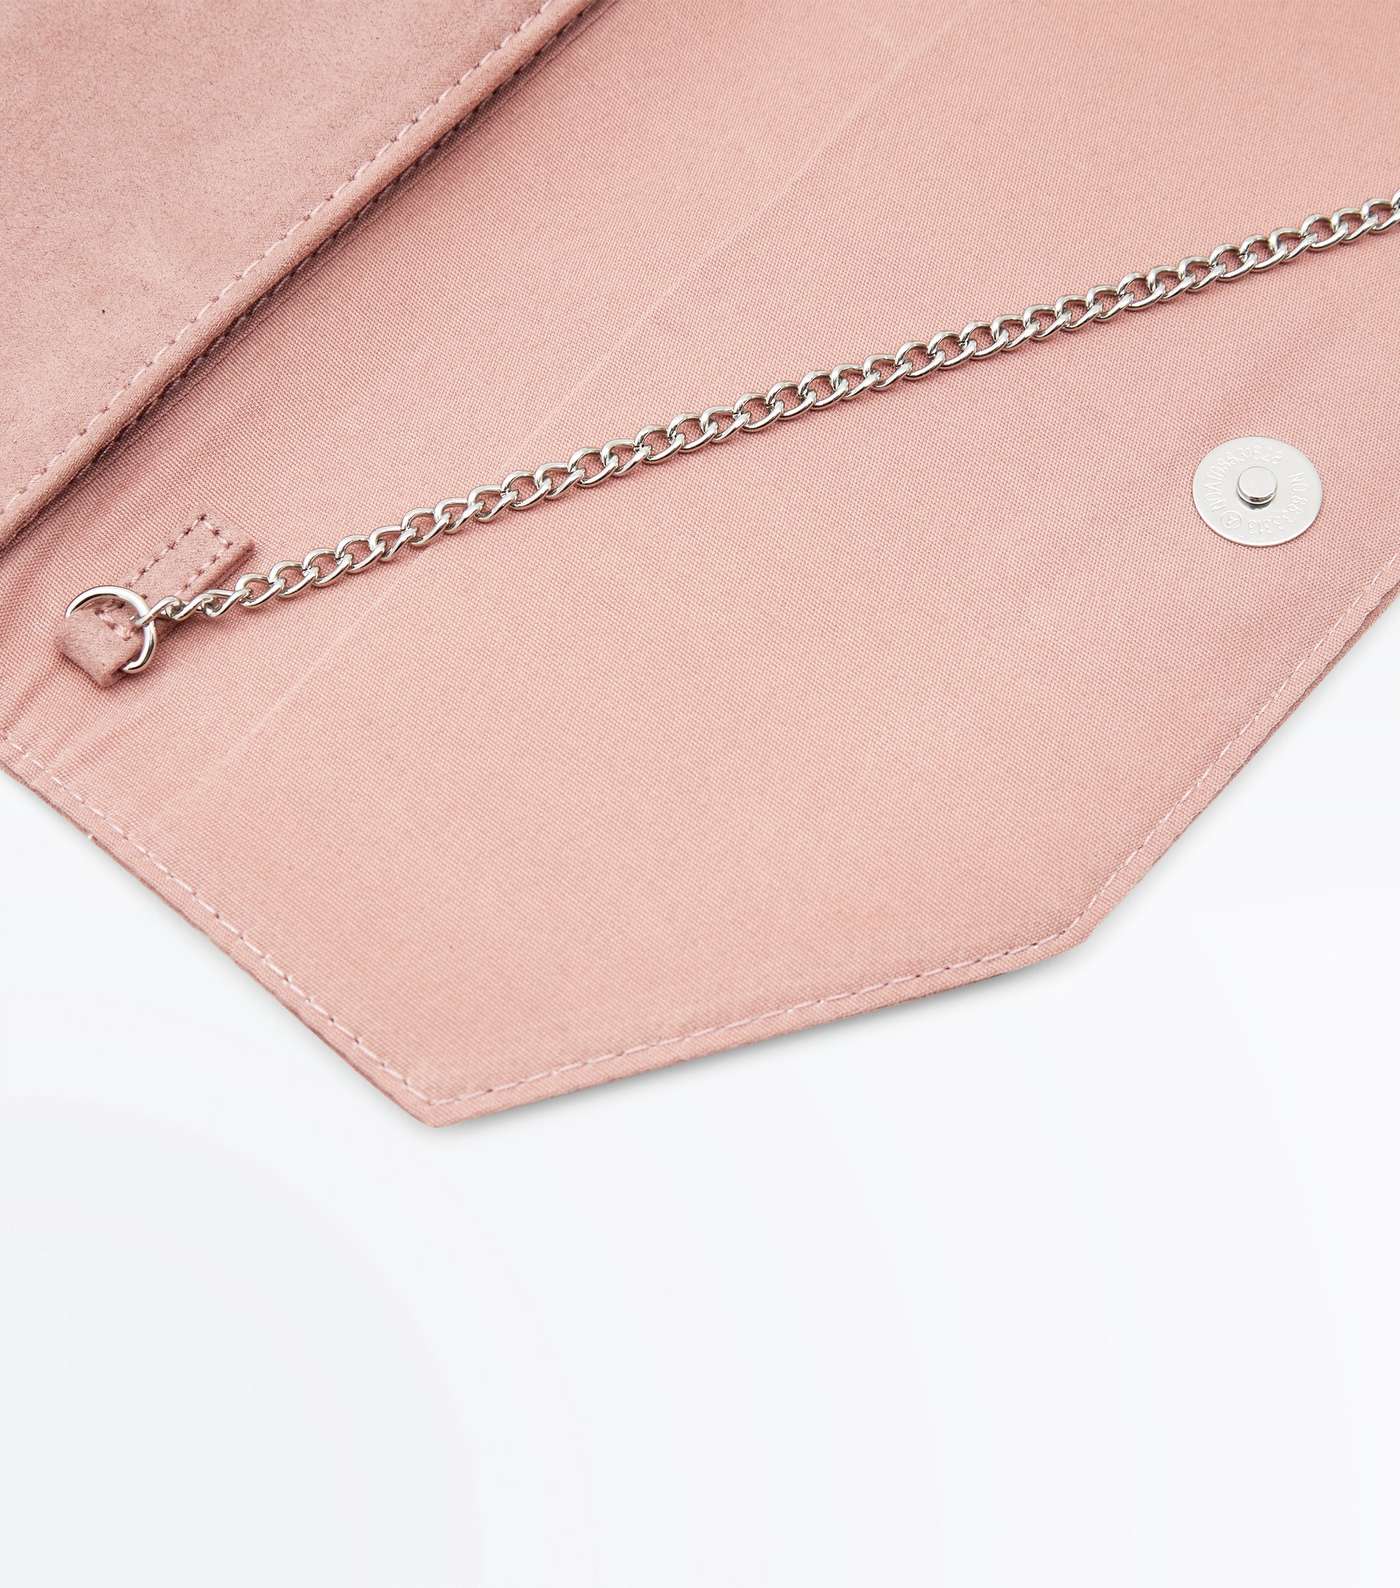 Nude Chain Strap Envelope Clutch Bag Image 5